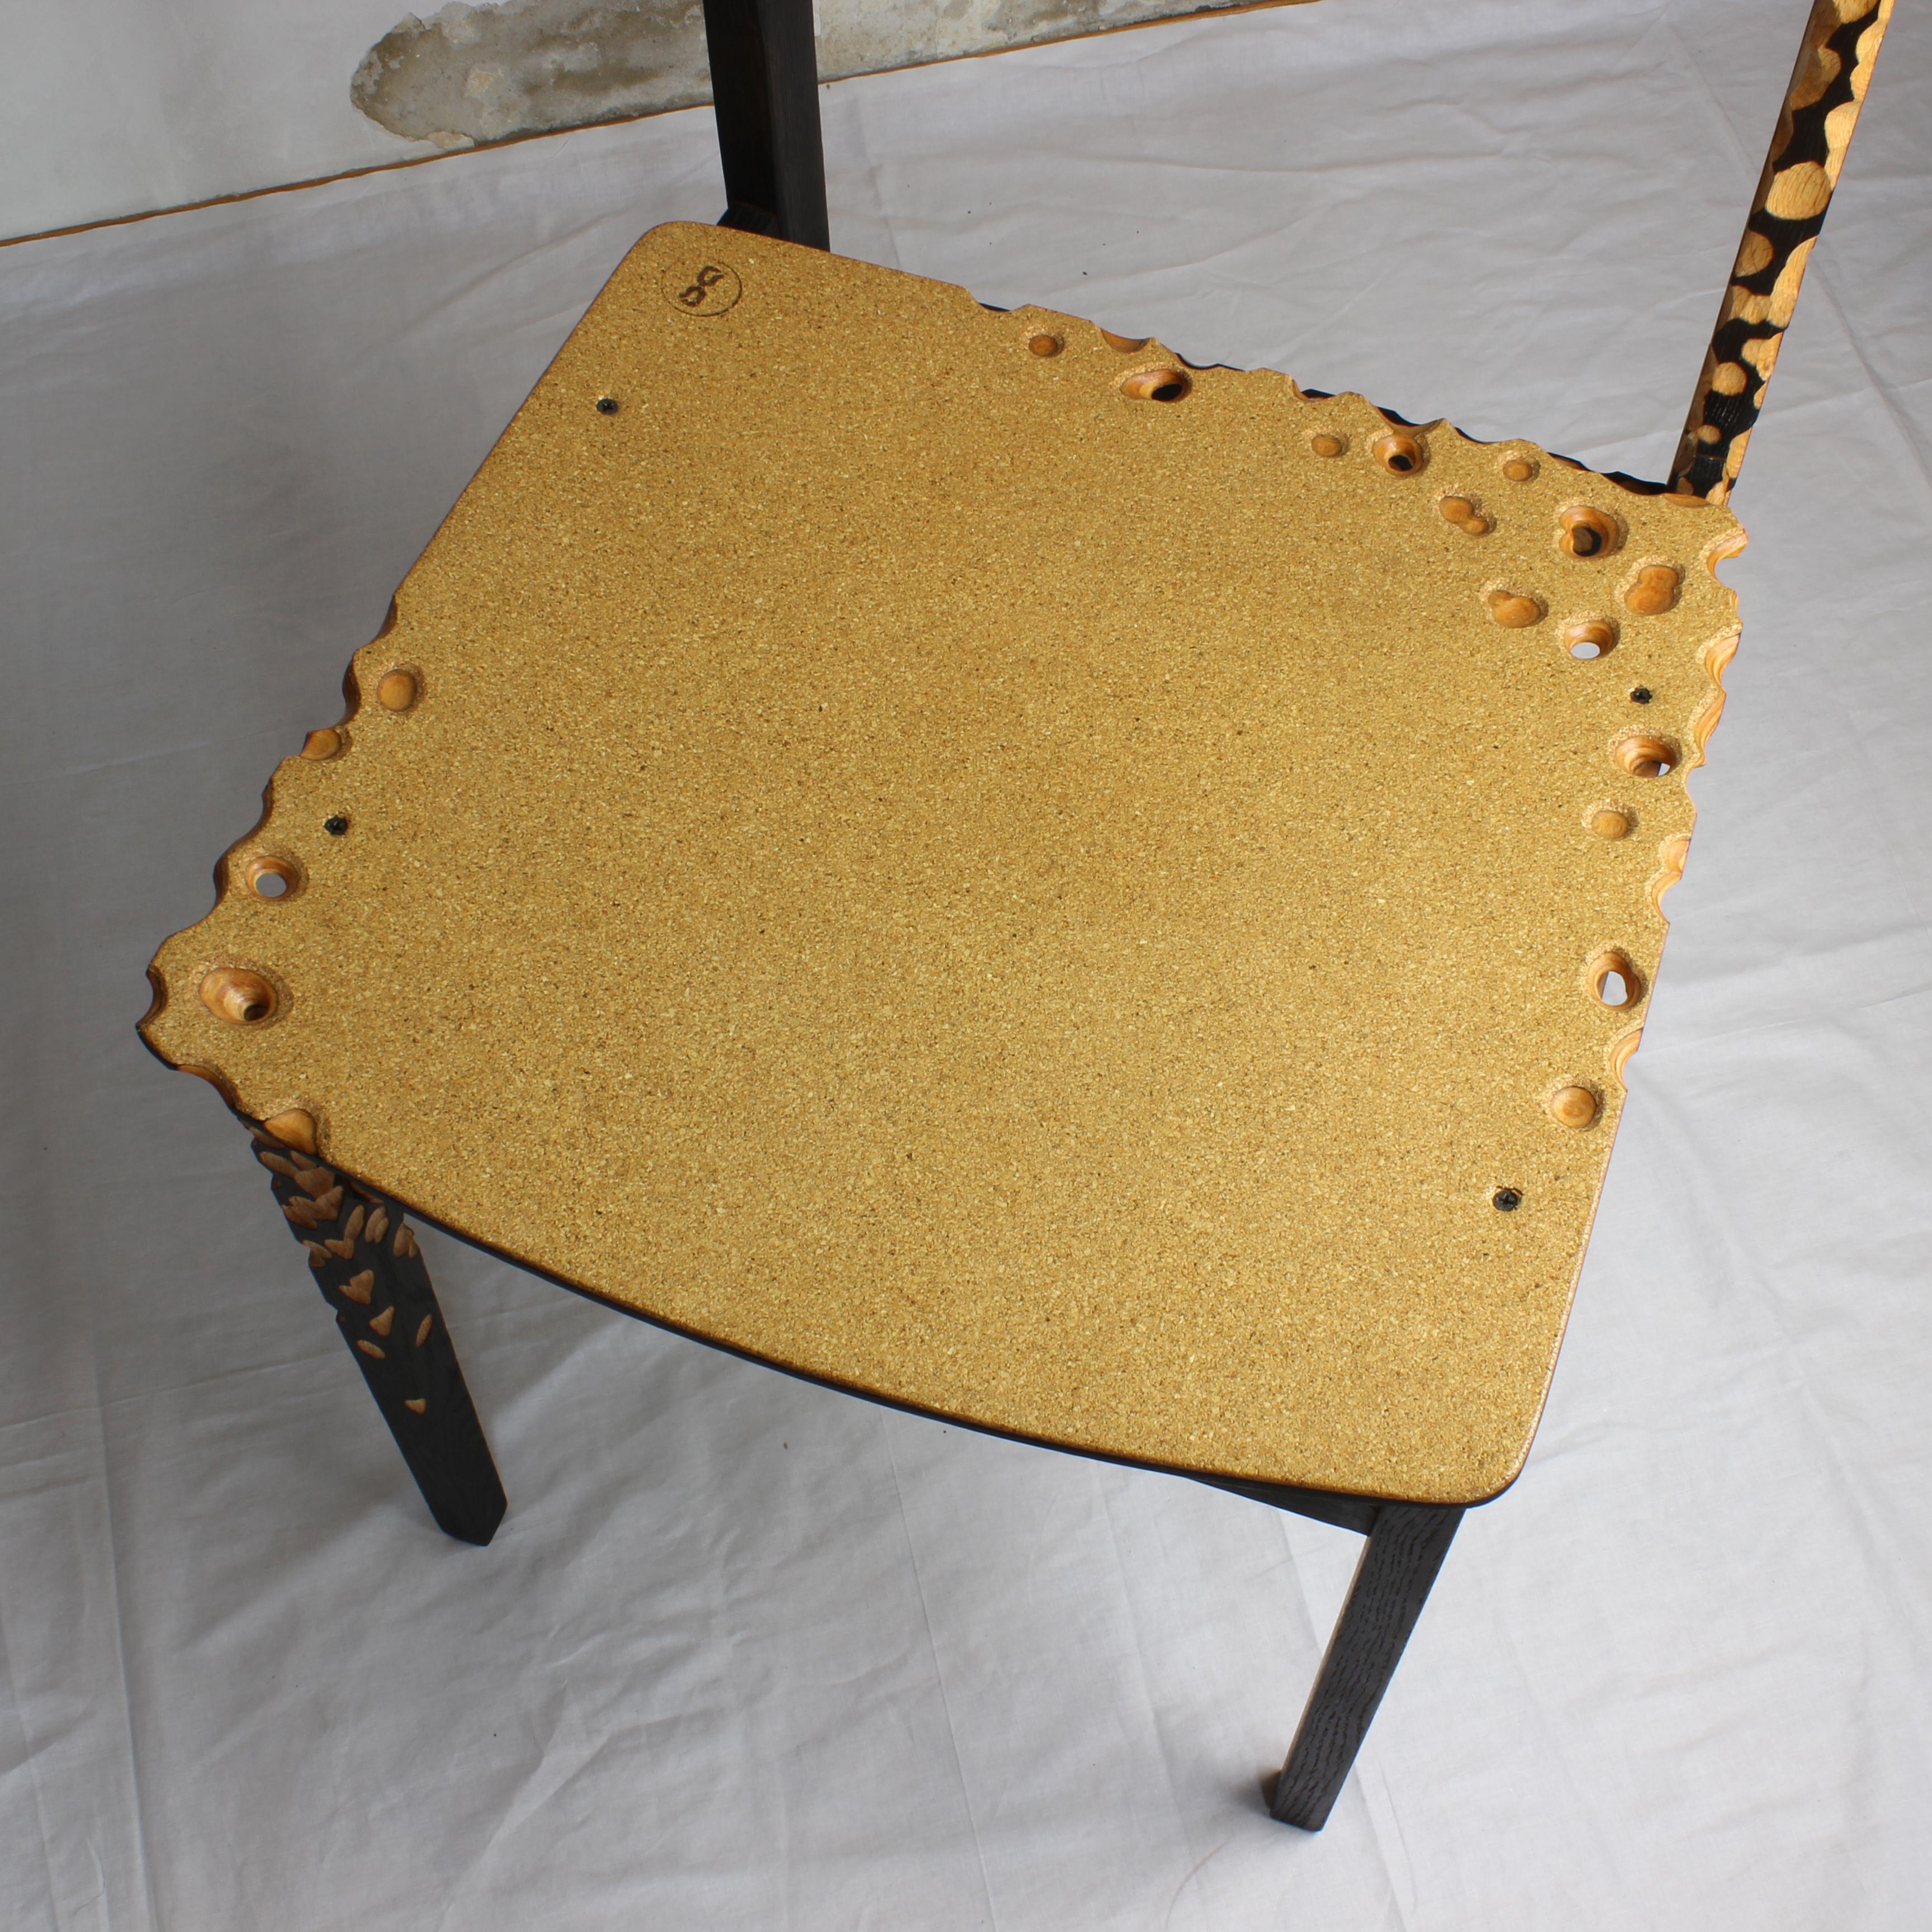 Blackened N1 Chair, Unique Sculptured, Charred Furniture, from Salvaged Chair and Cork For Sale